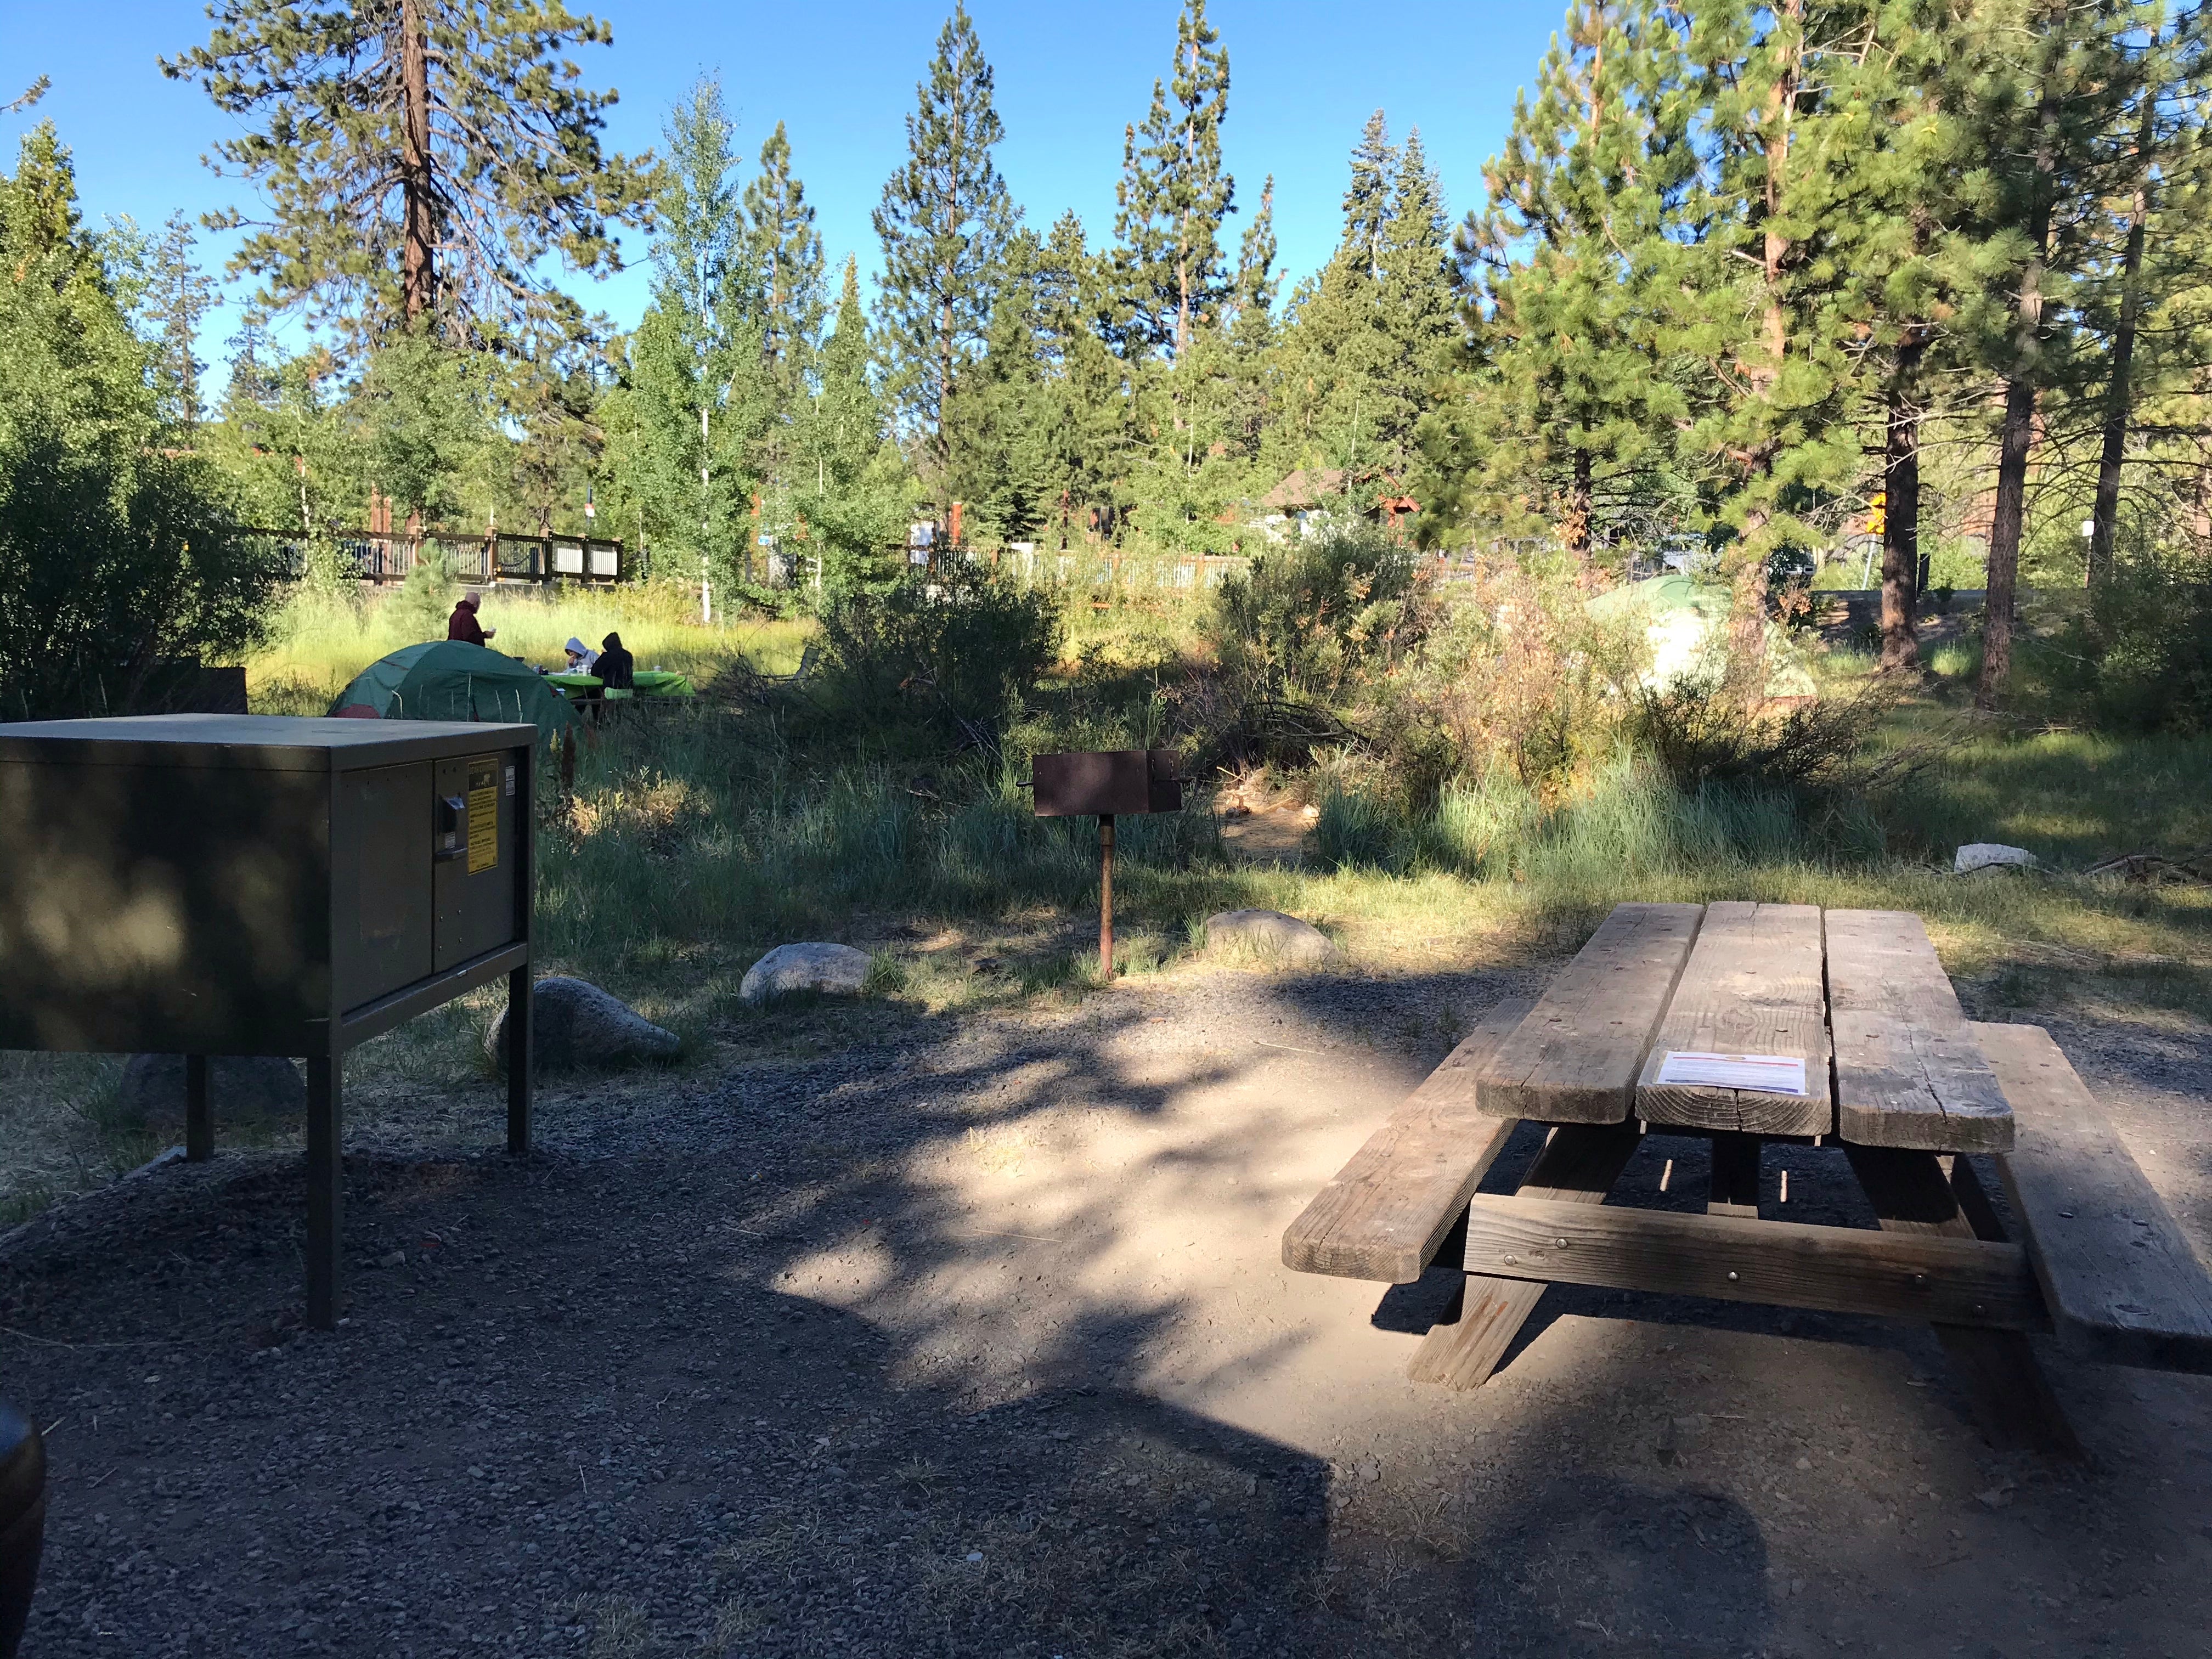 Camper submitted image from Tahoe State Recreation Area - 4